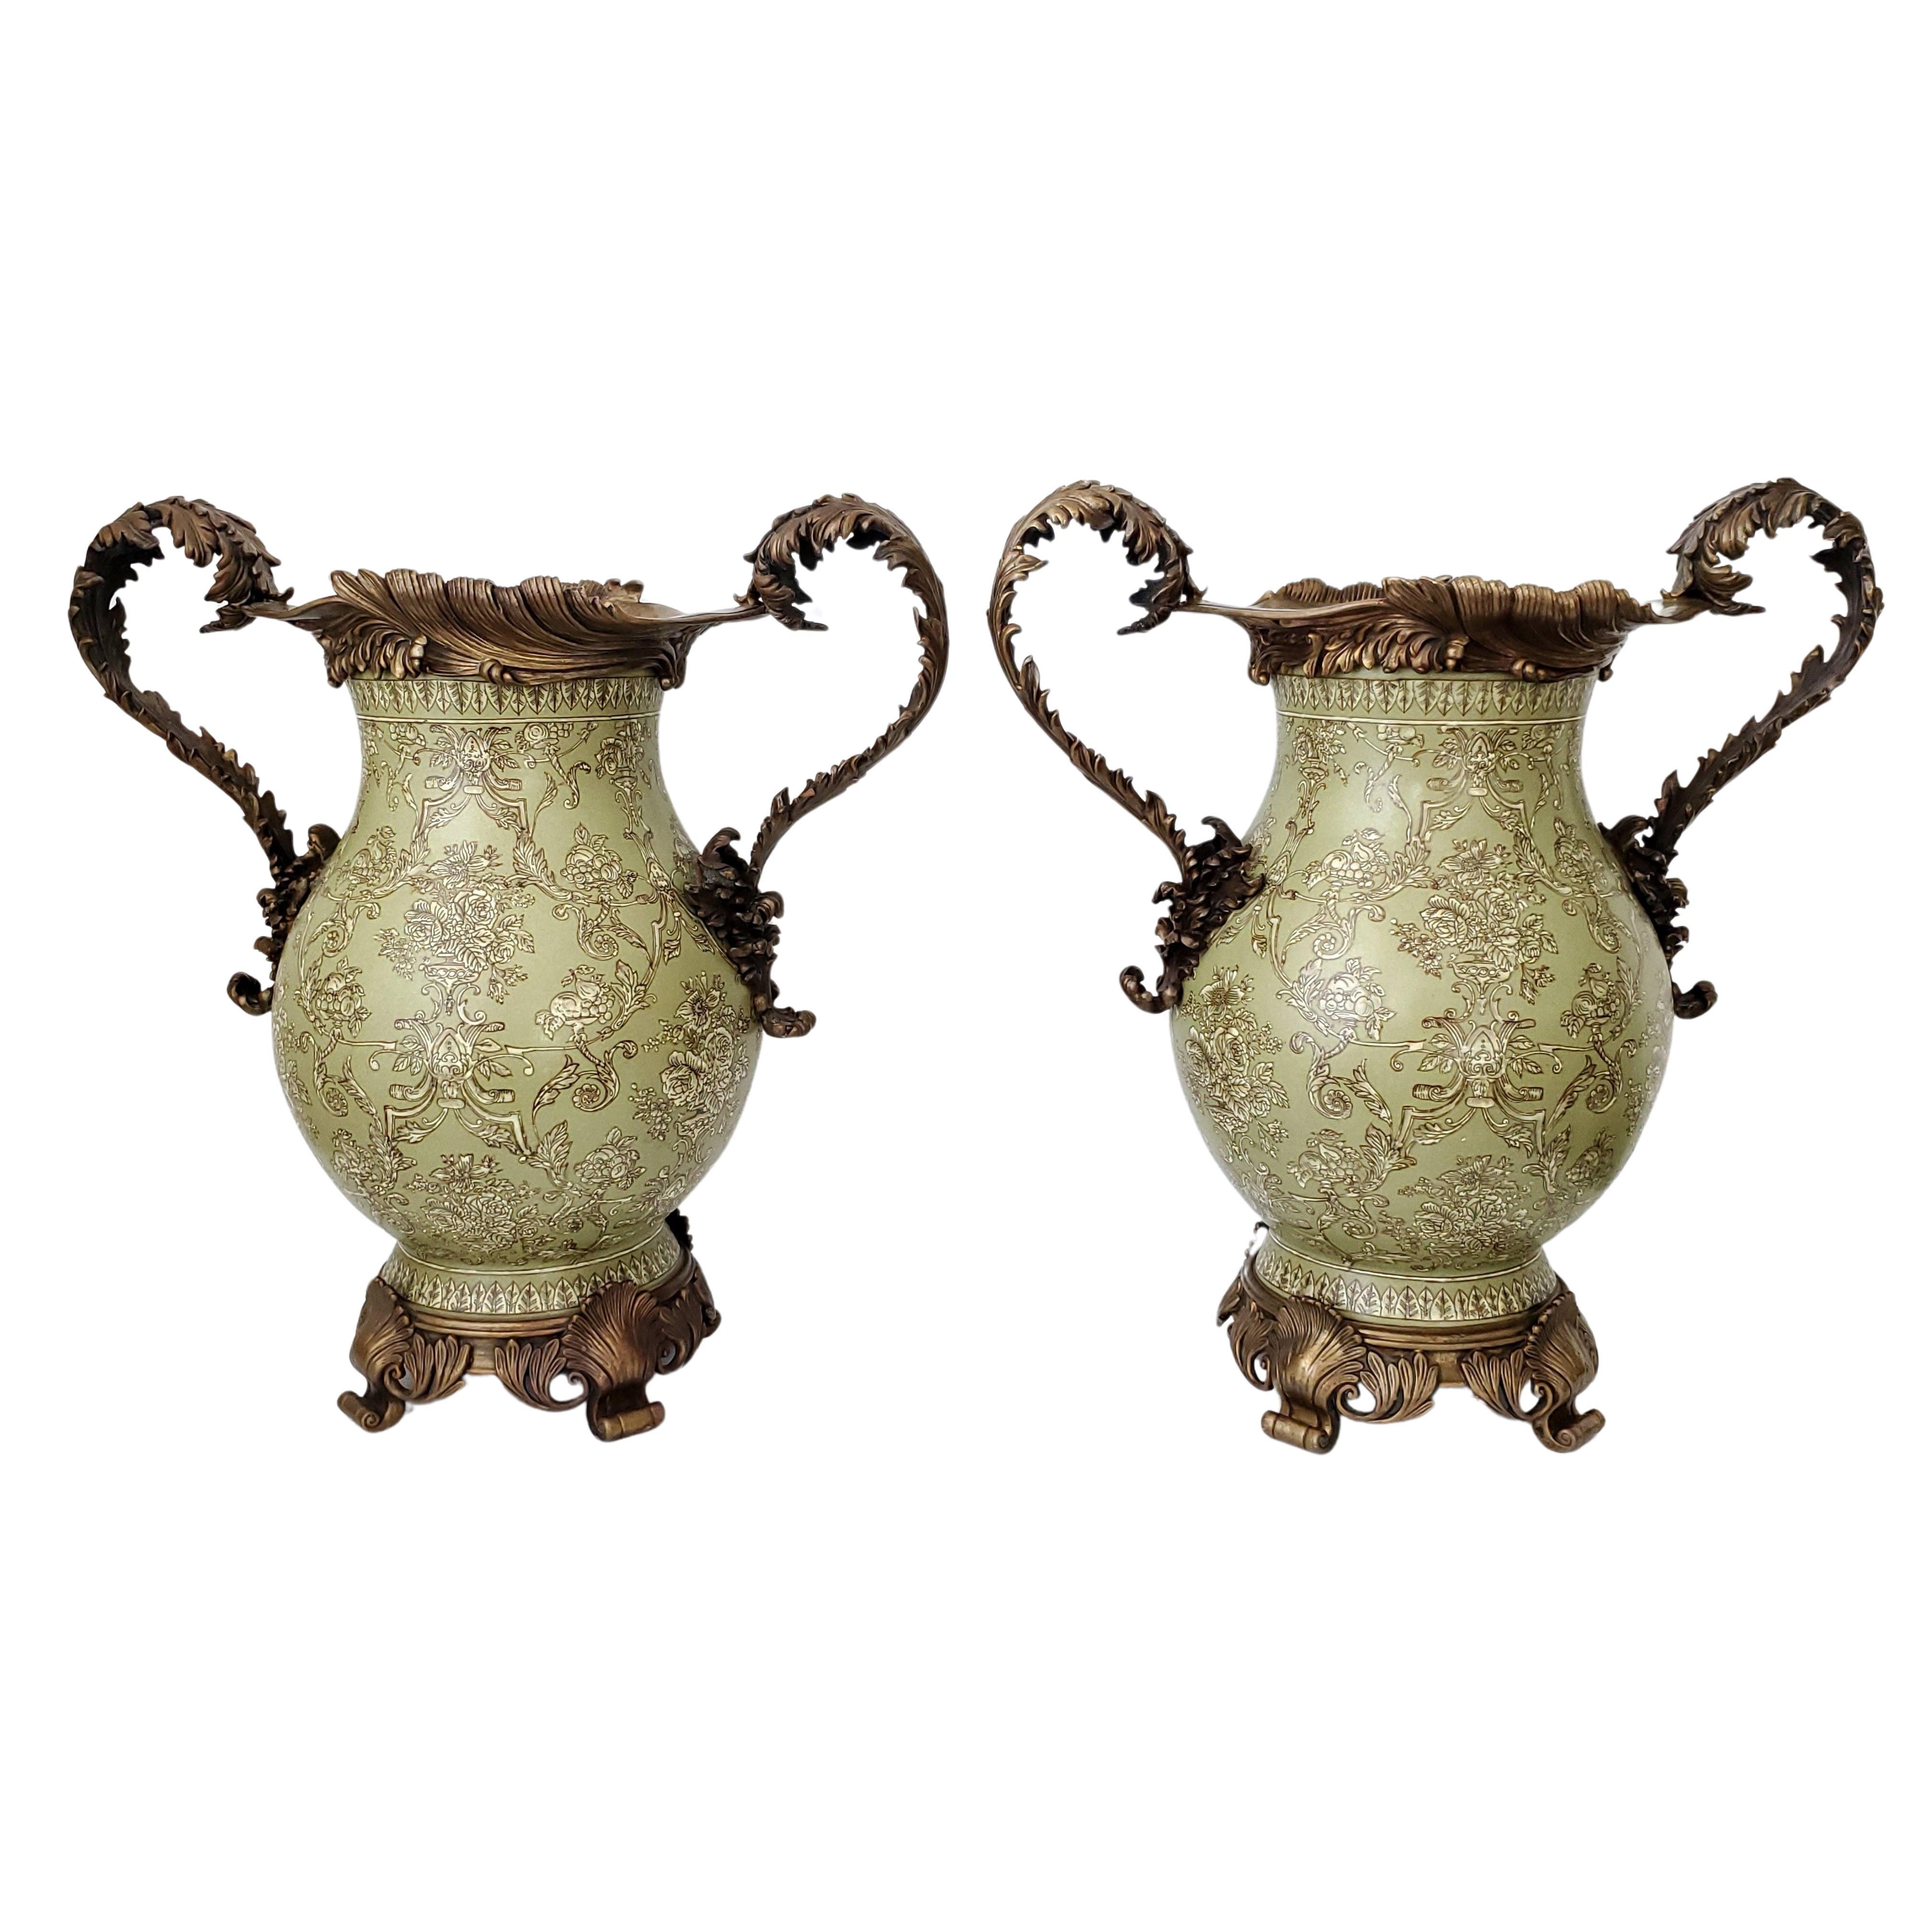 Monumental pair of vintage Chinoiserie urns decorated with ornate brass ormolu style handles, bases and rims, circa 1970s. 
The body of the large urns are heavy porcelain with intricate designs of textured roses and arabesque geometric patterns with